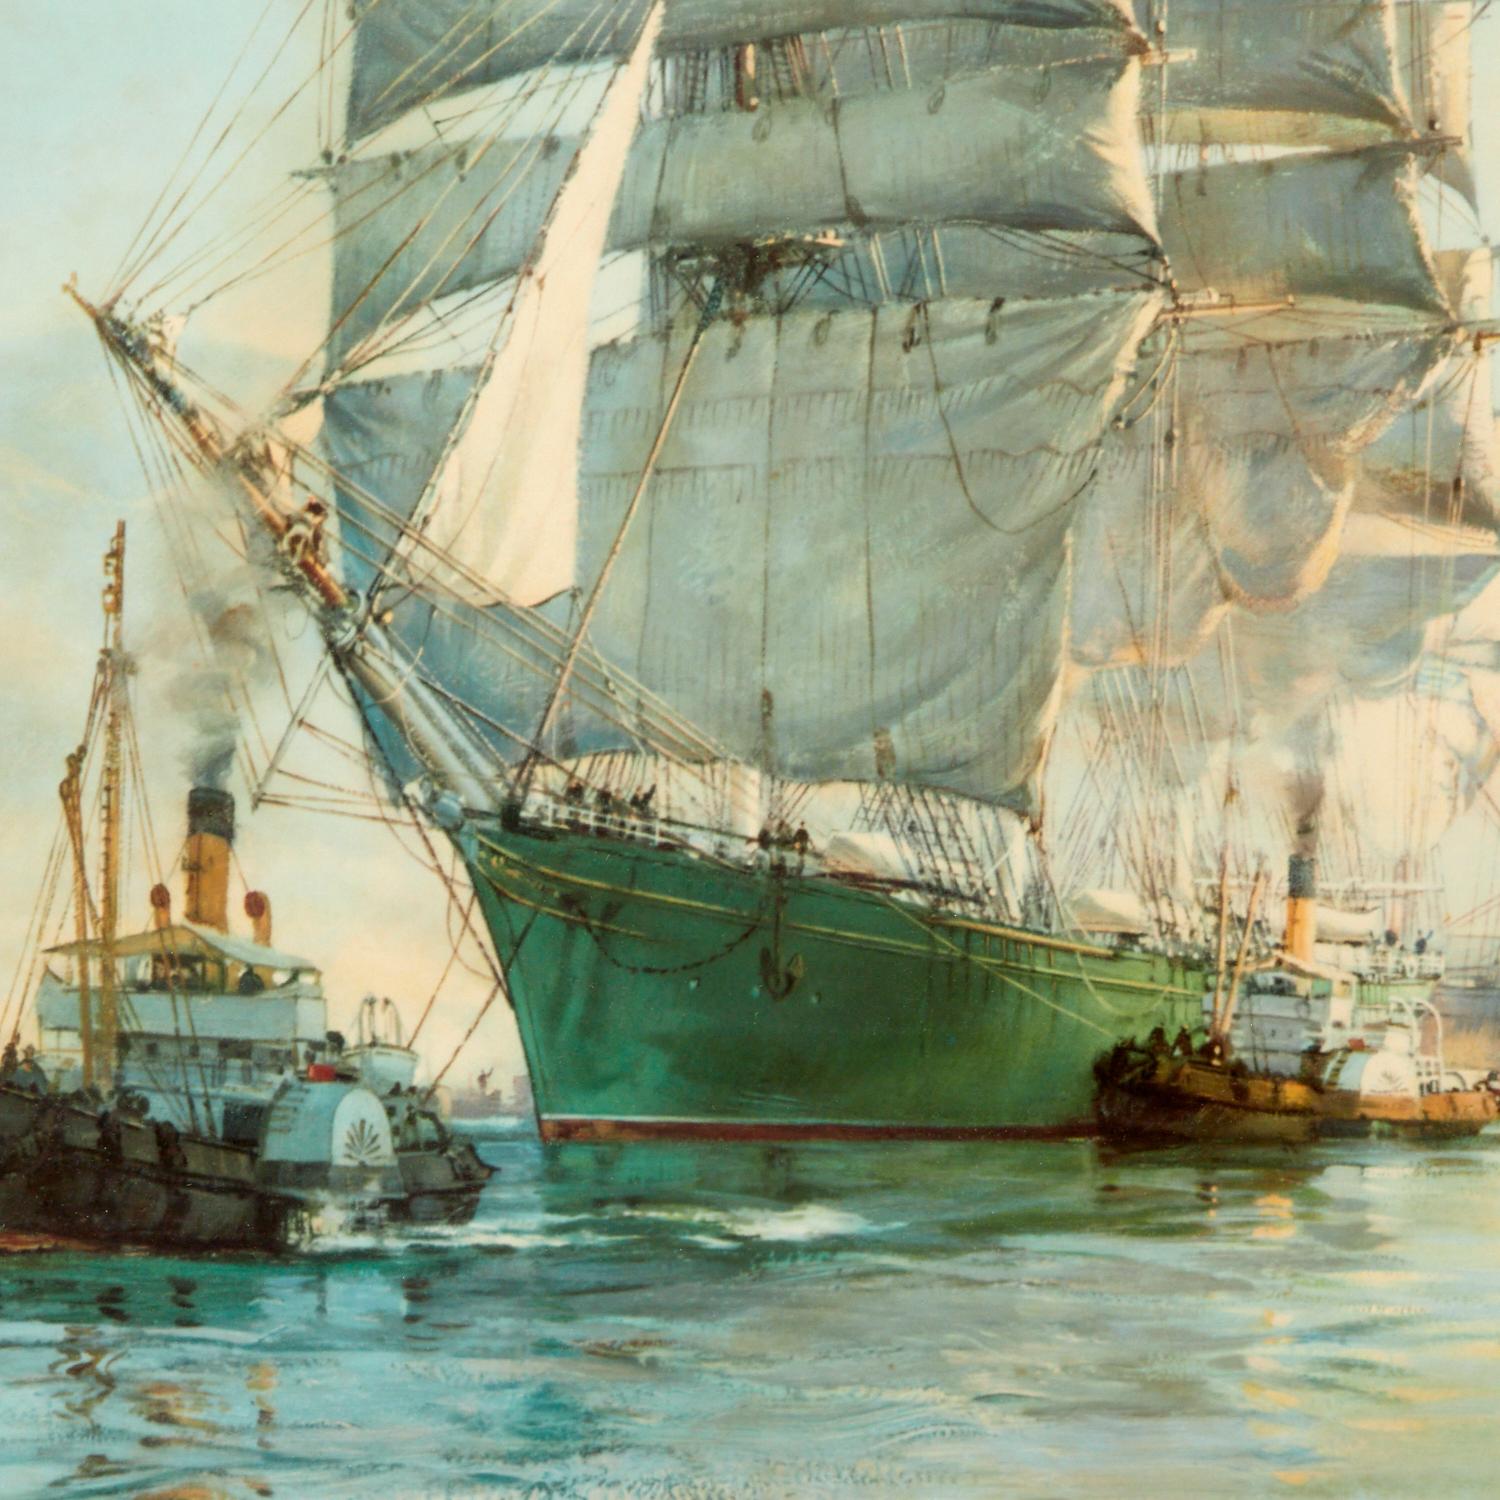 After Montague Dawson (British, 1895-1973), colour lithograph, matted and framed under non-glare glass. 